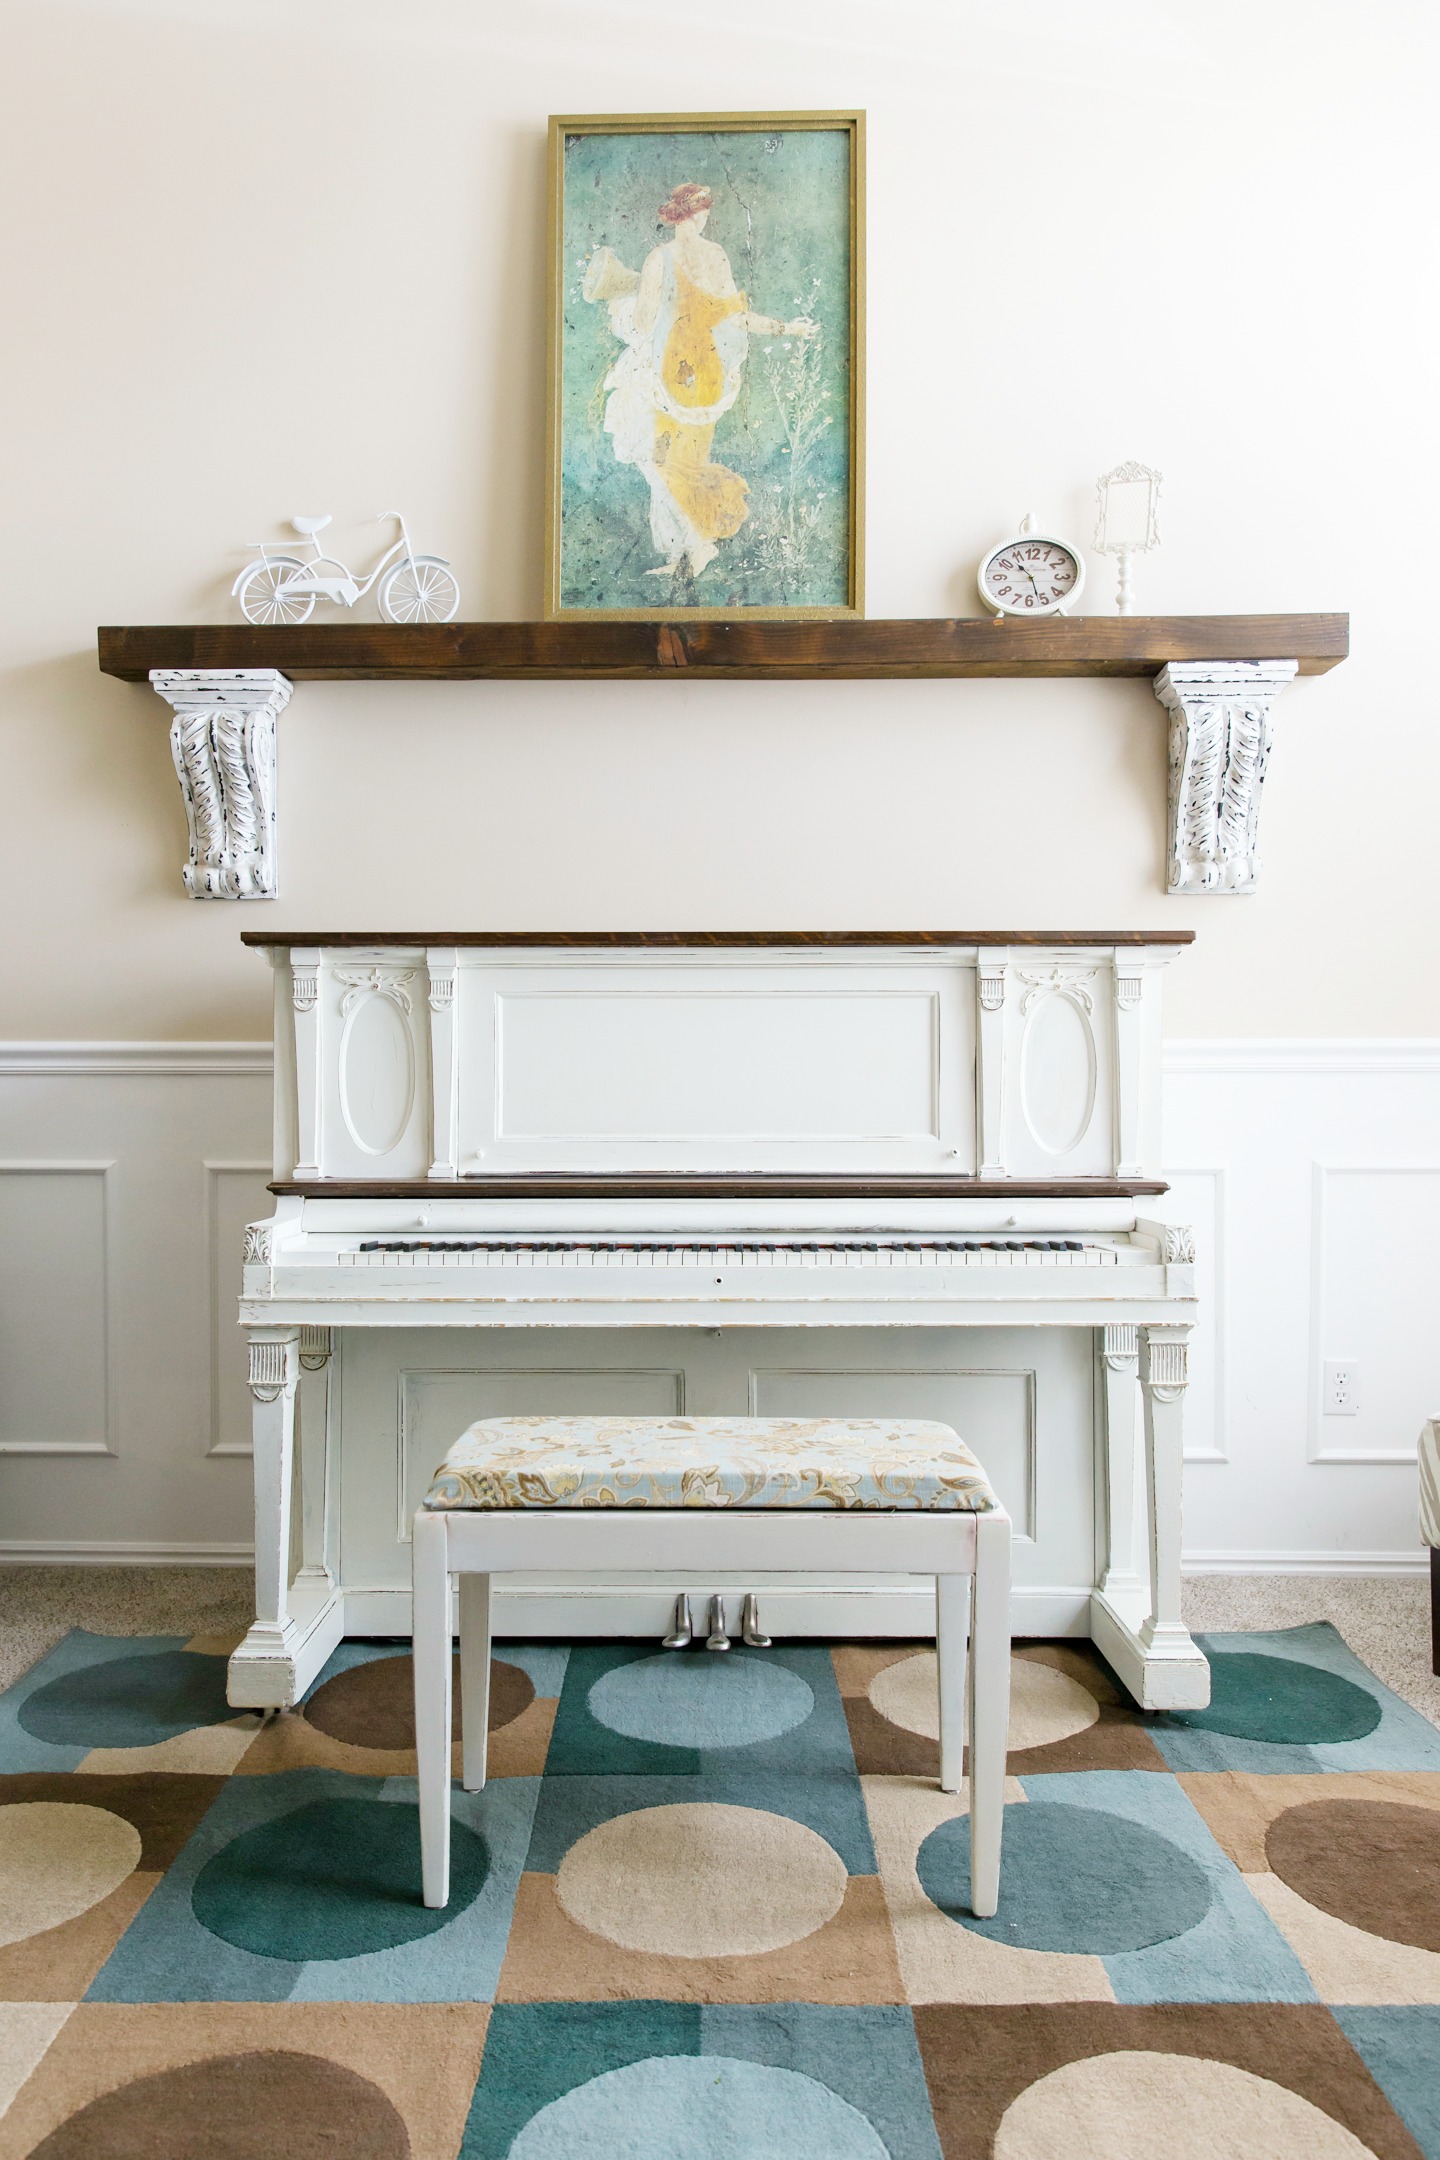 The Piano Project - How to Paint a Piano